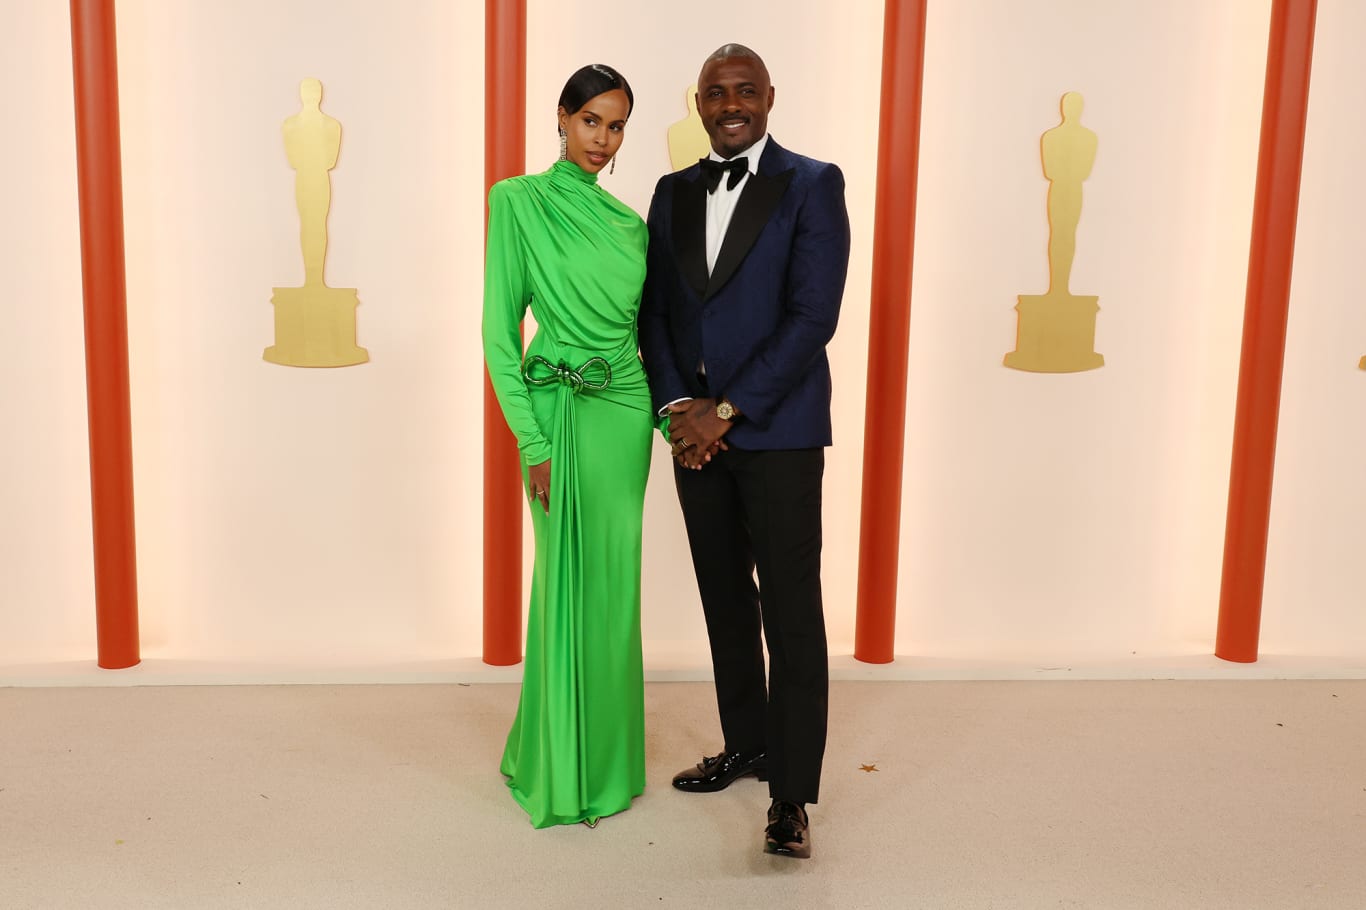 Sabrina Dhowre Elba, pictured alongside husband Idris Elba, turned heads in a bright green draped gown by Stella McCartney. 